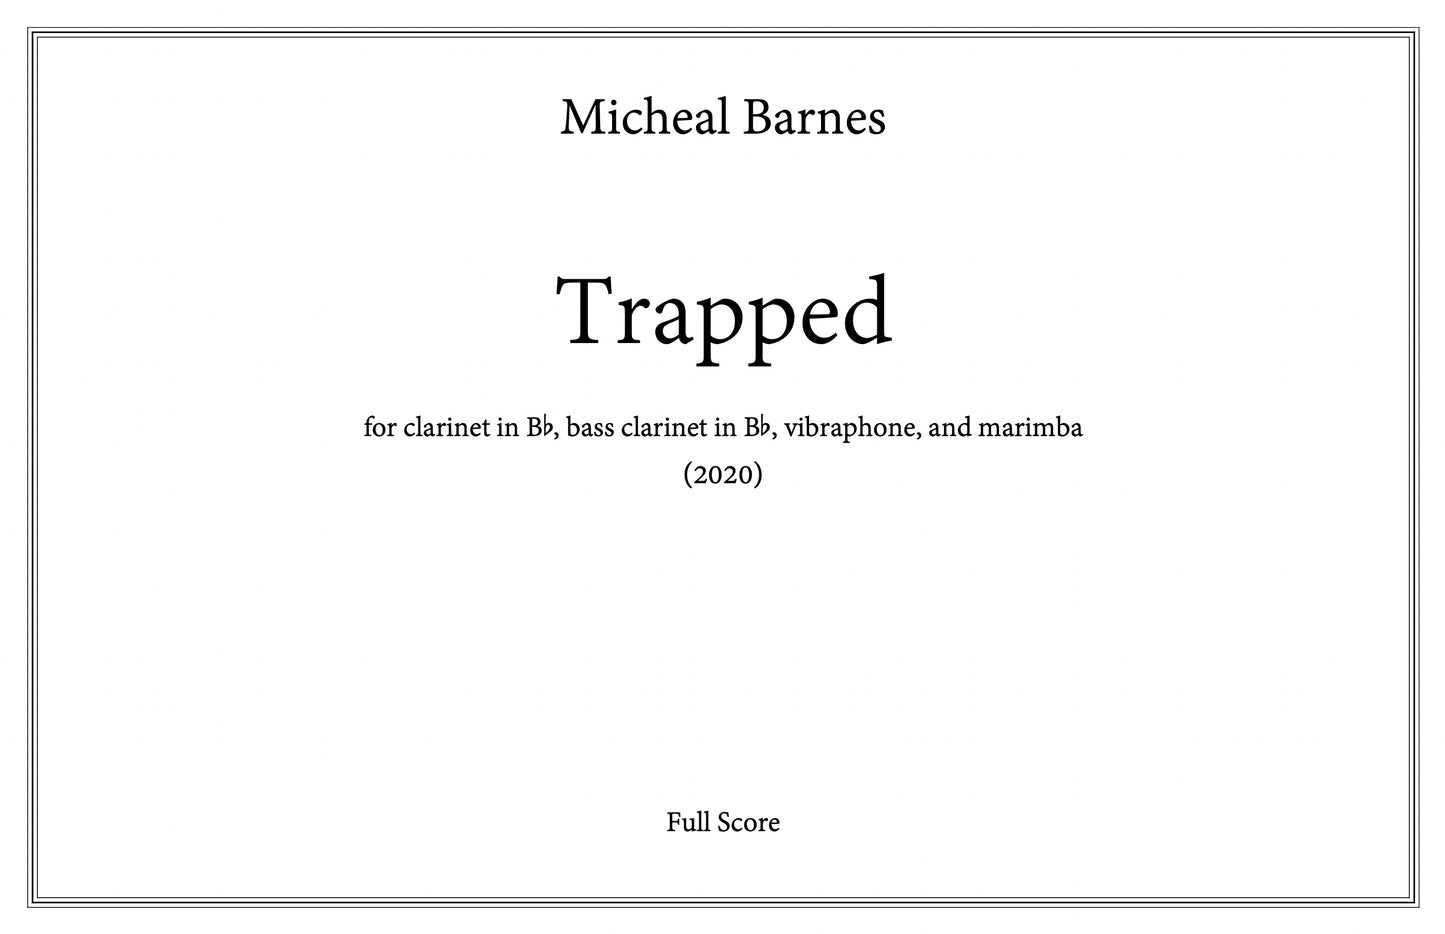 Trapped by Micheal Barnes